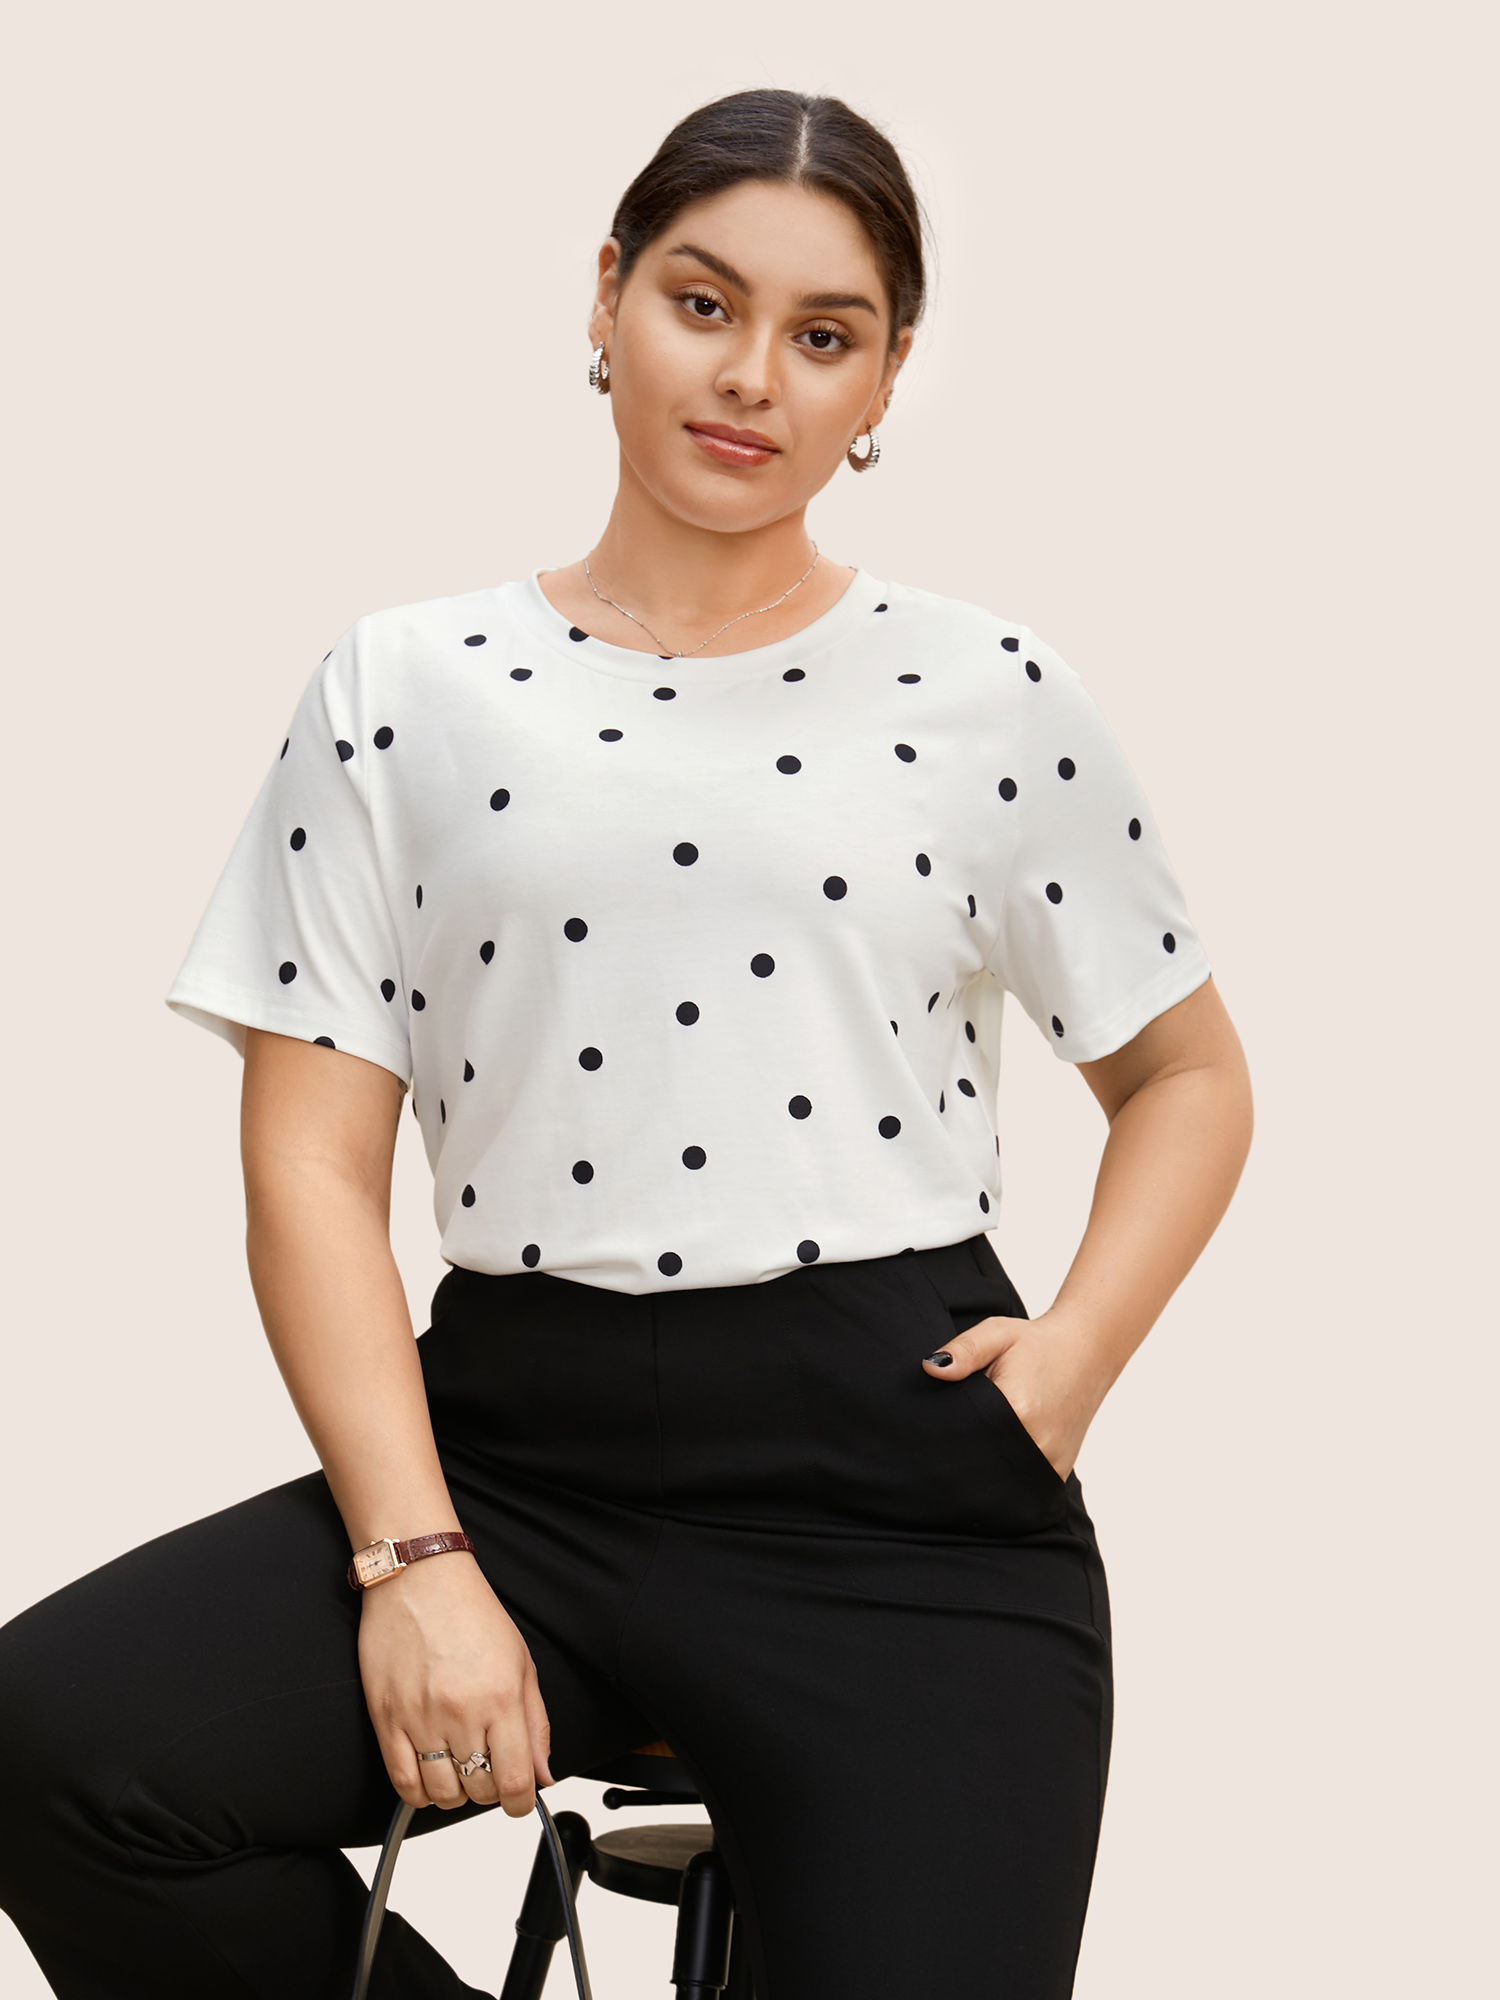 

Plus Size Round Neck Polka Dot Contrast T-shirt Originalwhite Women At the Office Contrast Round Neck Work T-shirts BloomChic